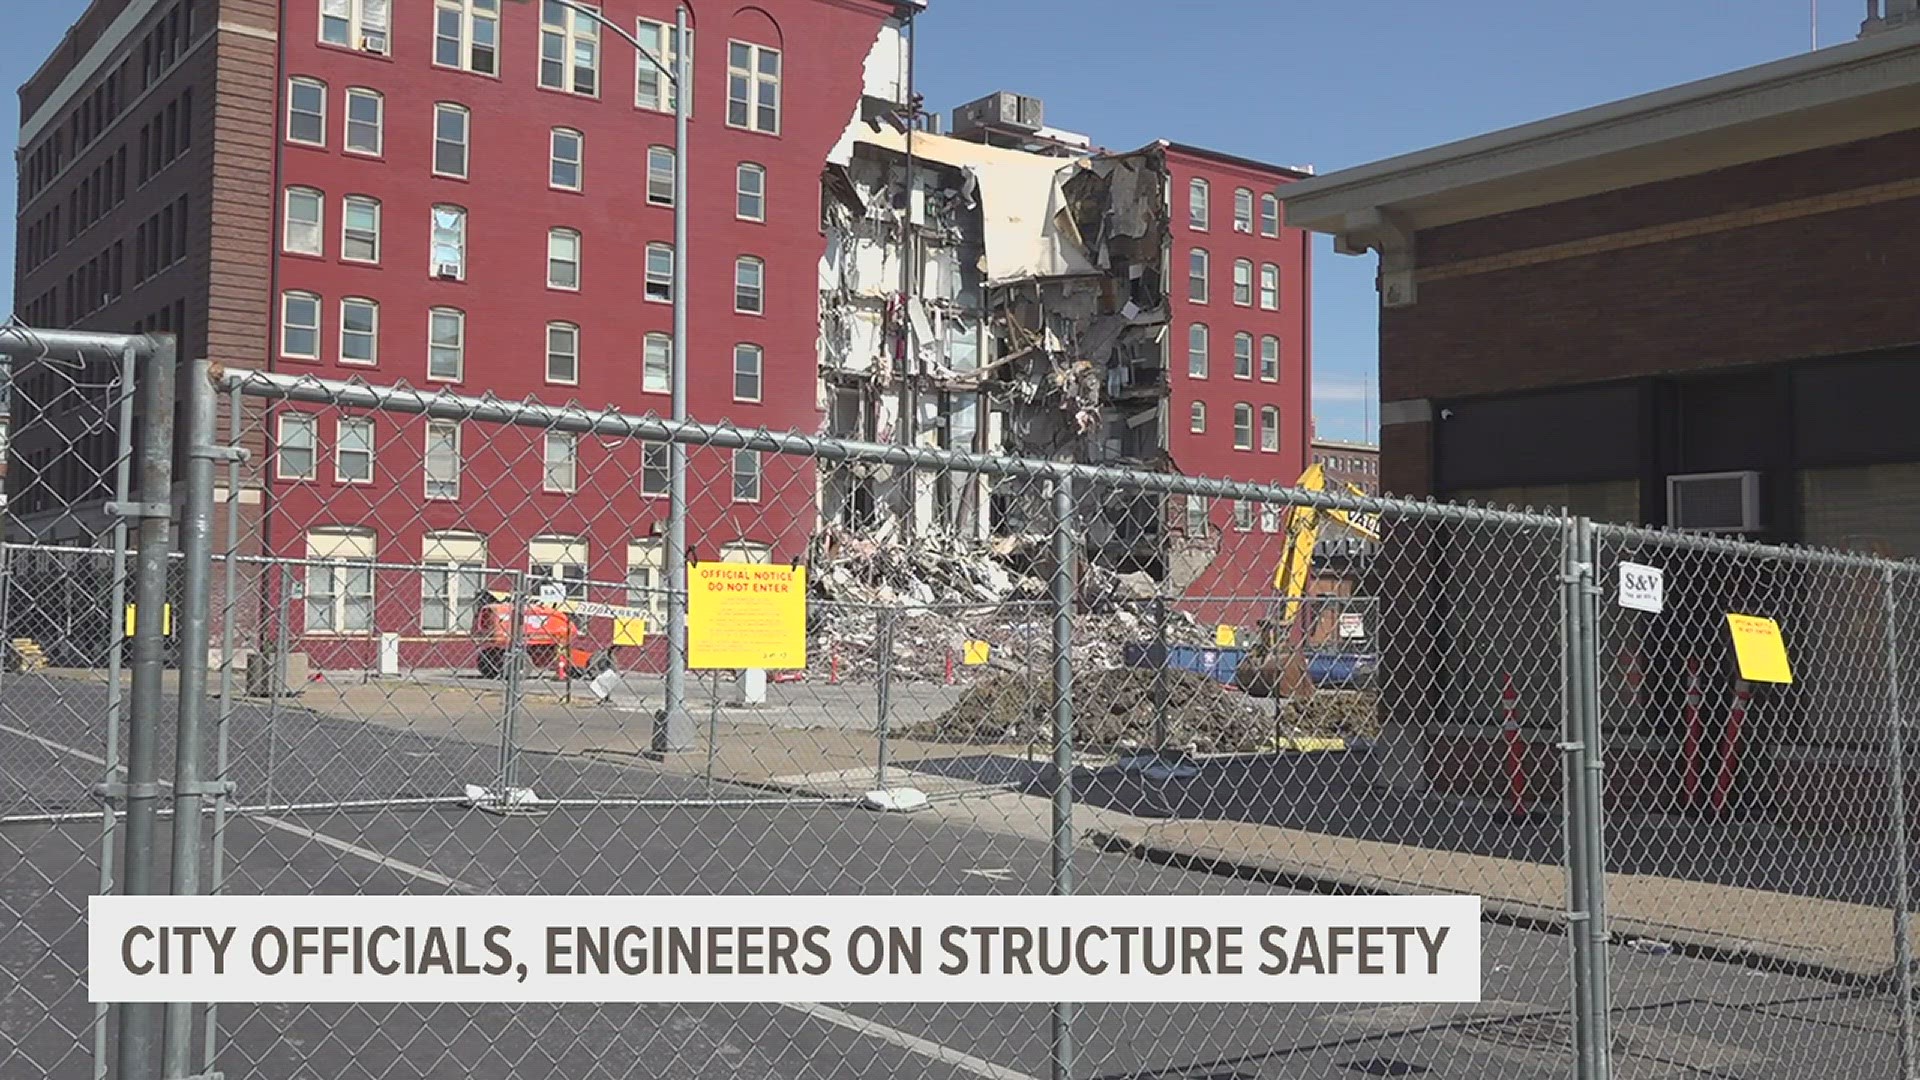 Engineers said the pile of rubble at the base of the collapsed section is not only helping to keep the building upright, but also hampering search and rescue.